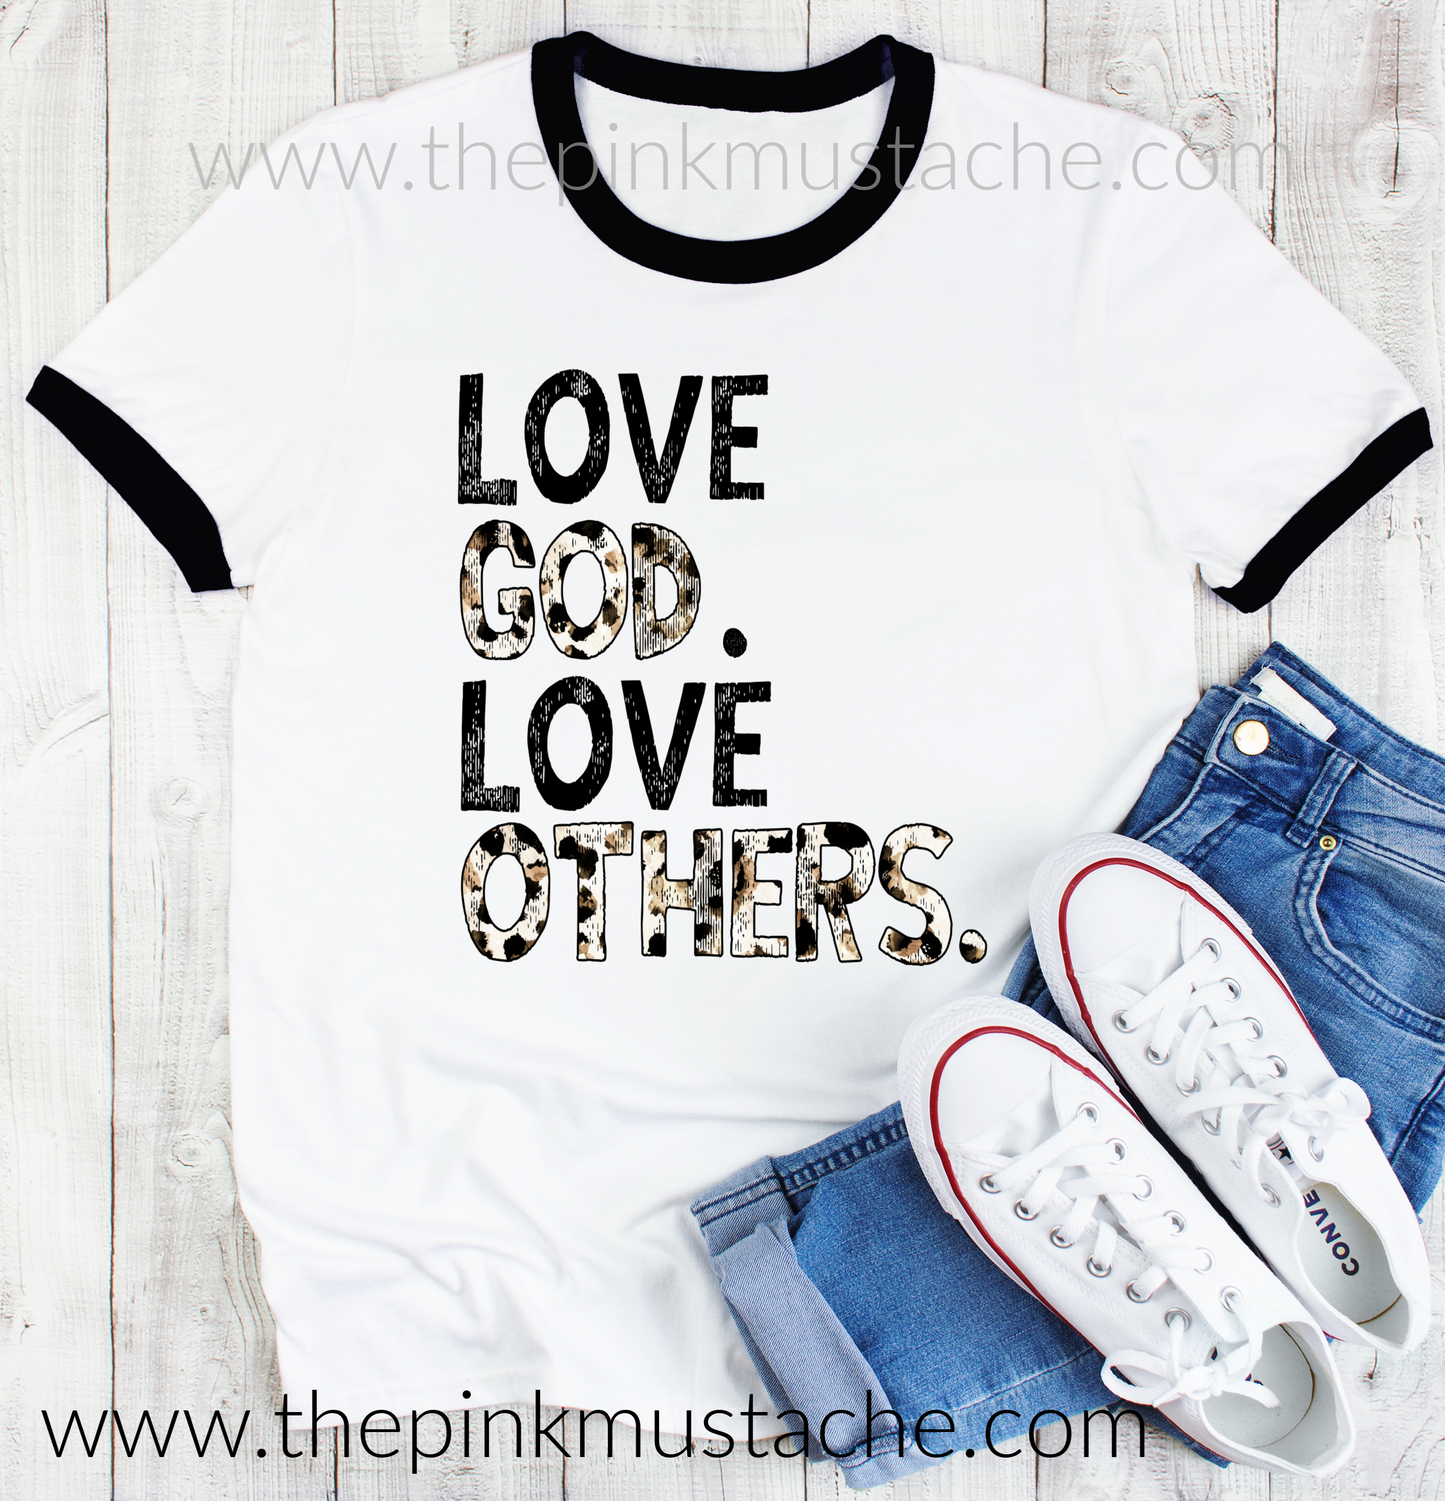 Love God Love Others Ringer Tee- sizes 2T - Adult 3XL - Soft Style Tees / Mommy and Me